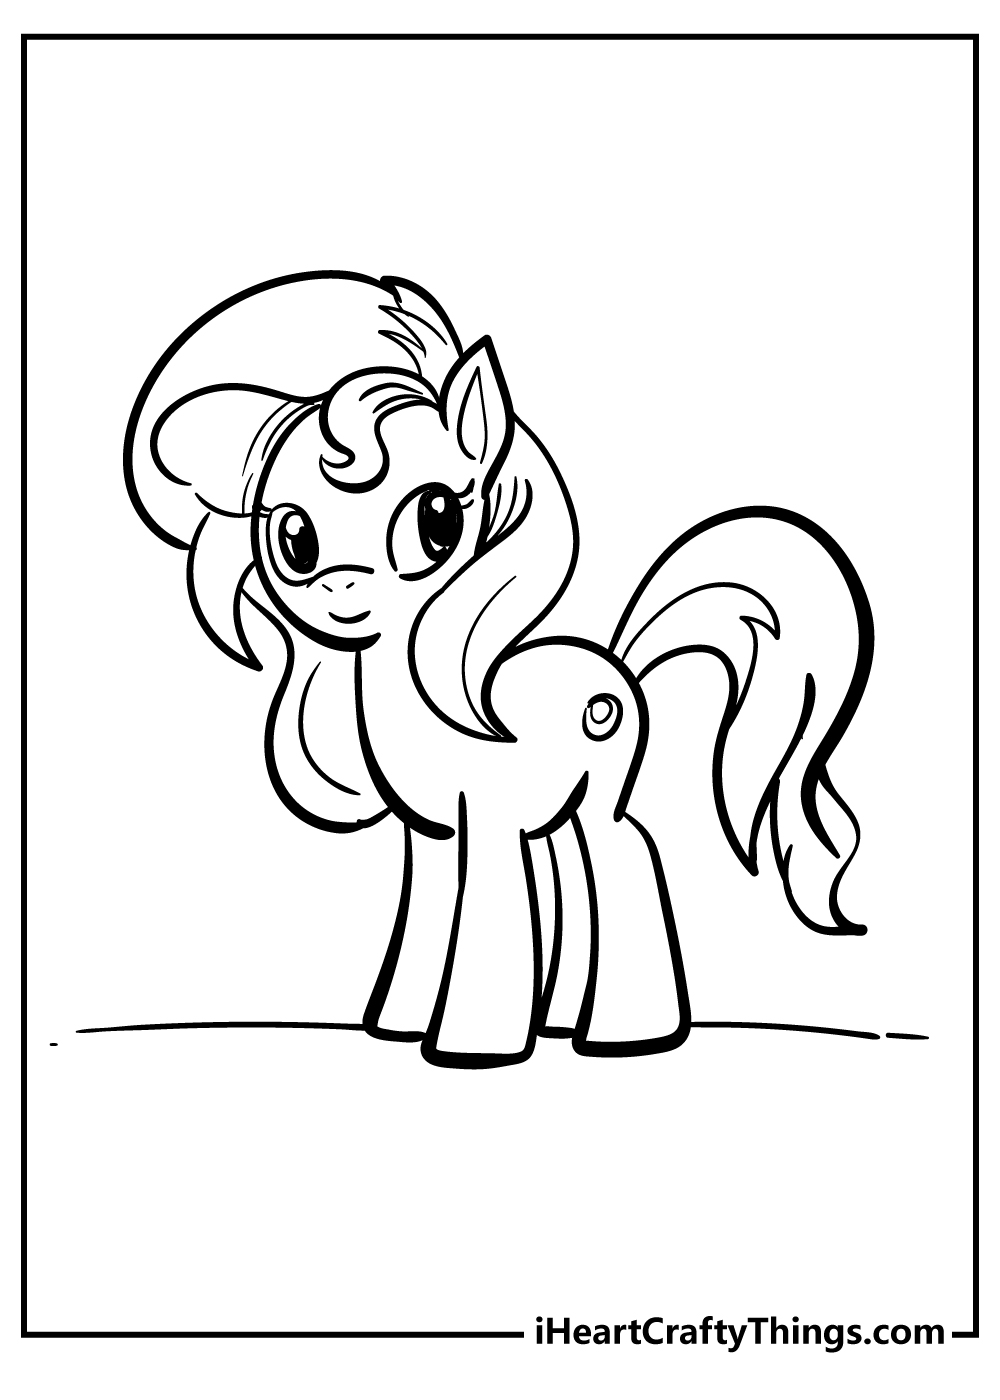 My Little Pony Coloring Pages Updated 21 - bestcoloring-pages.com